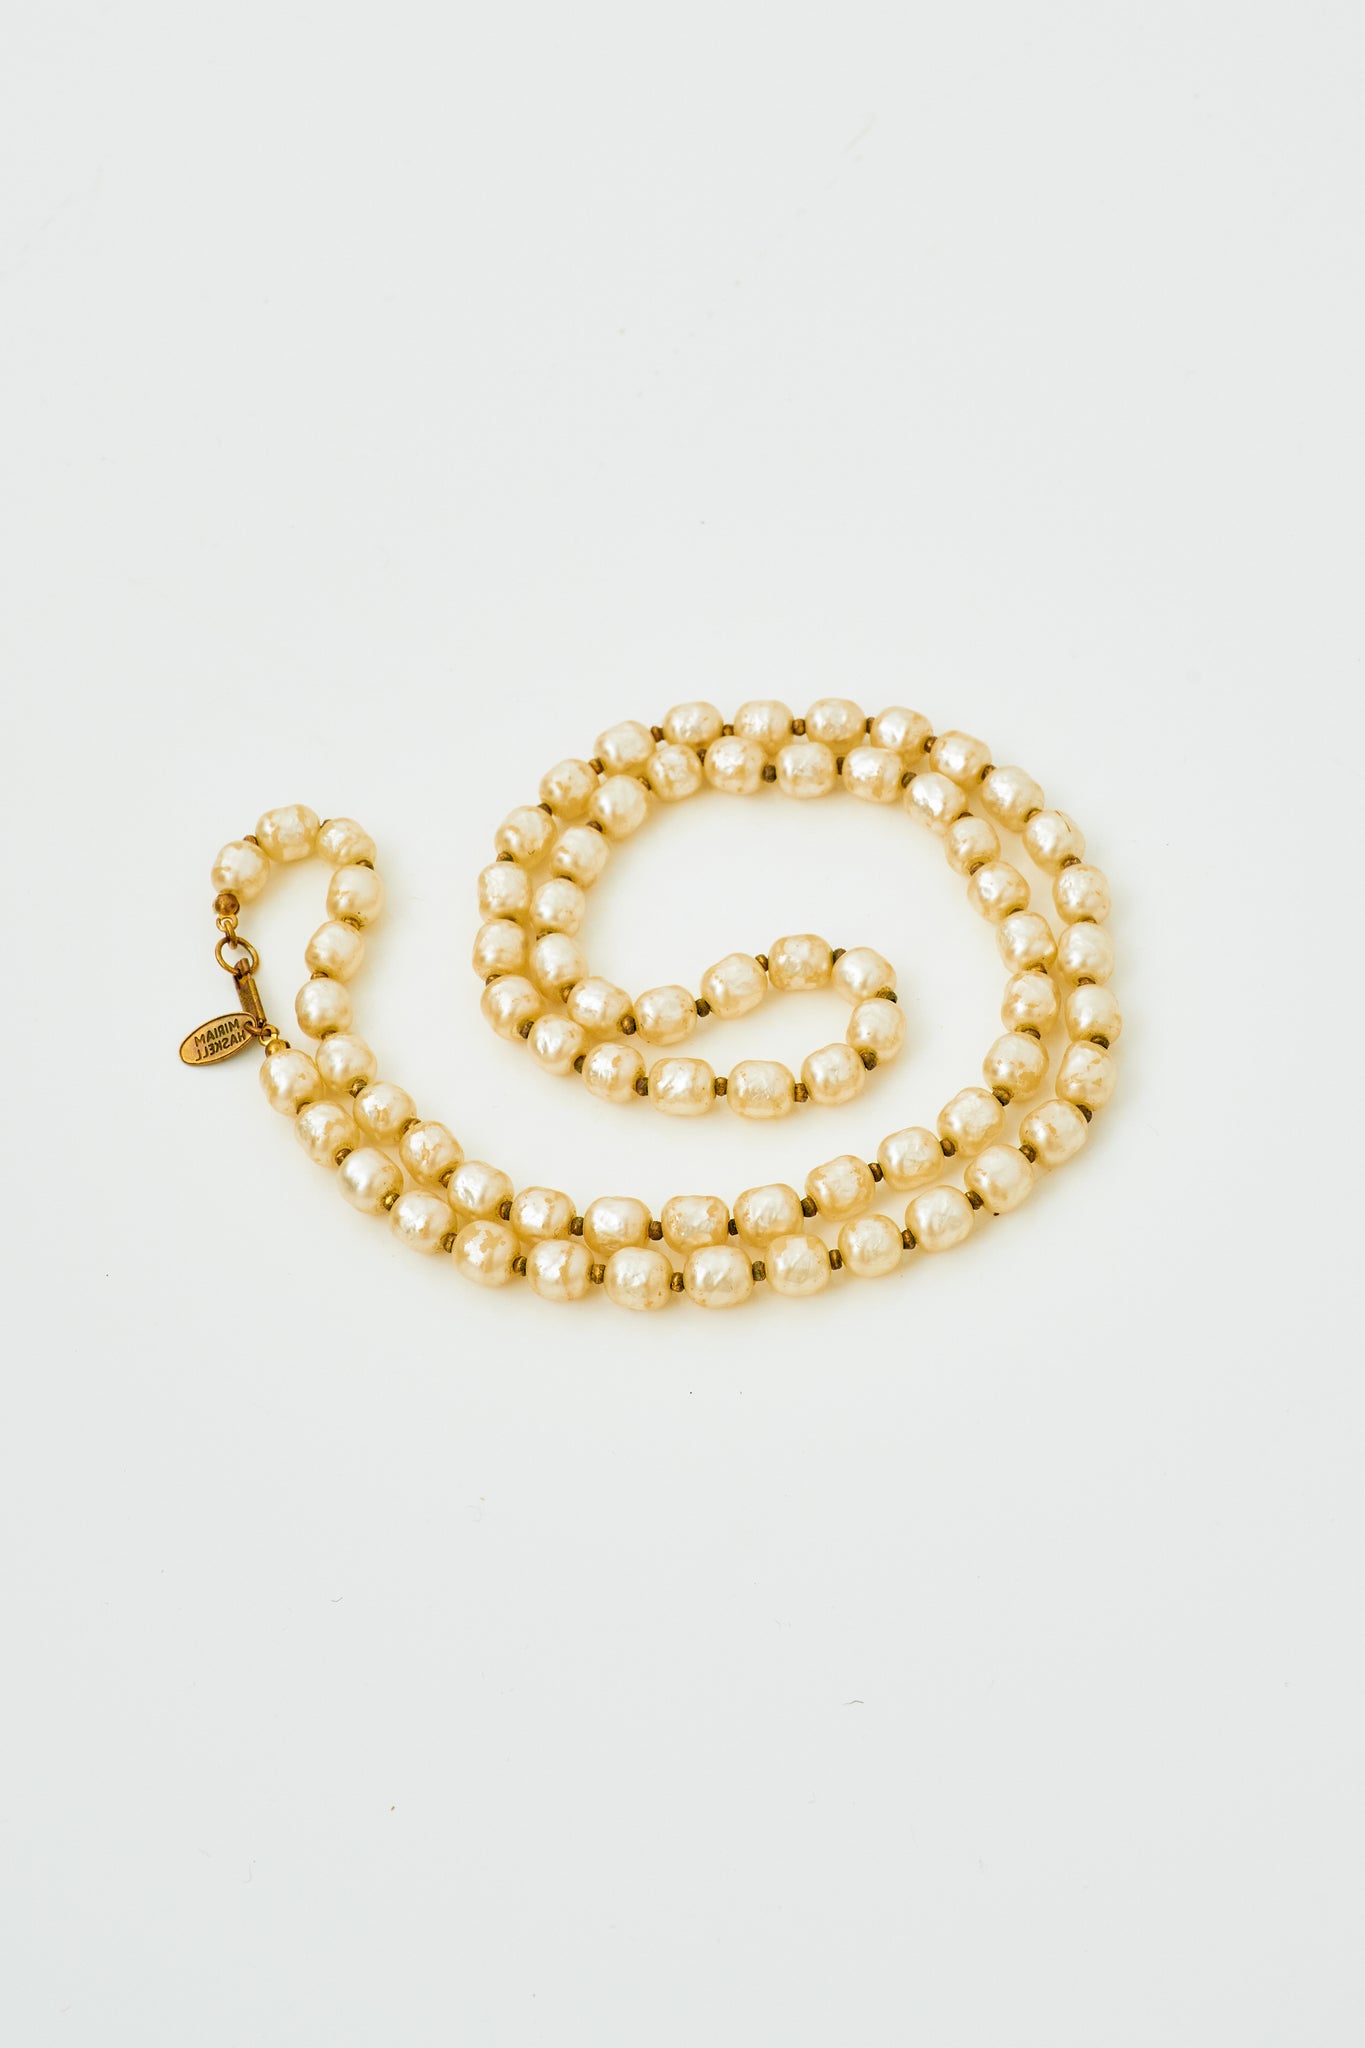 Miriam Haskell Pearl Necklace